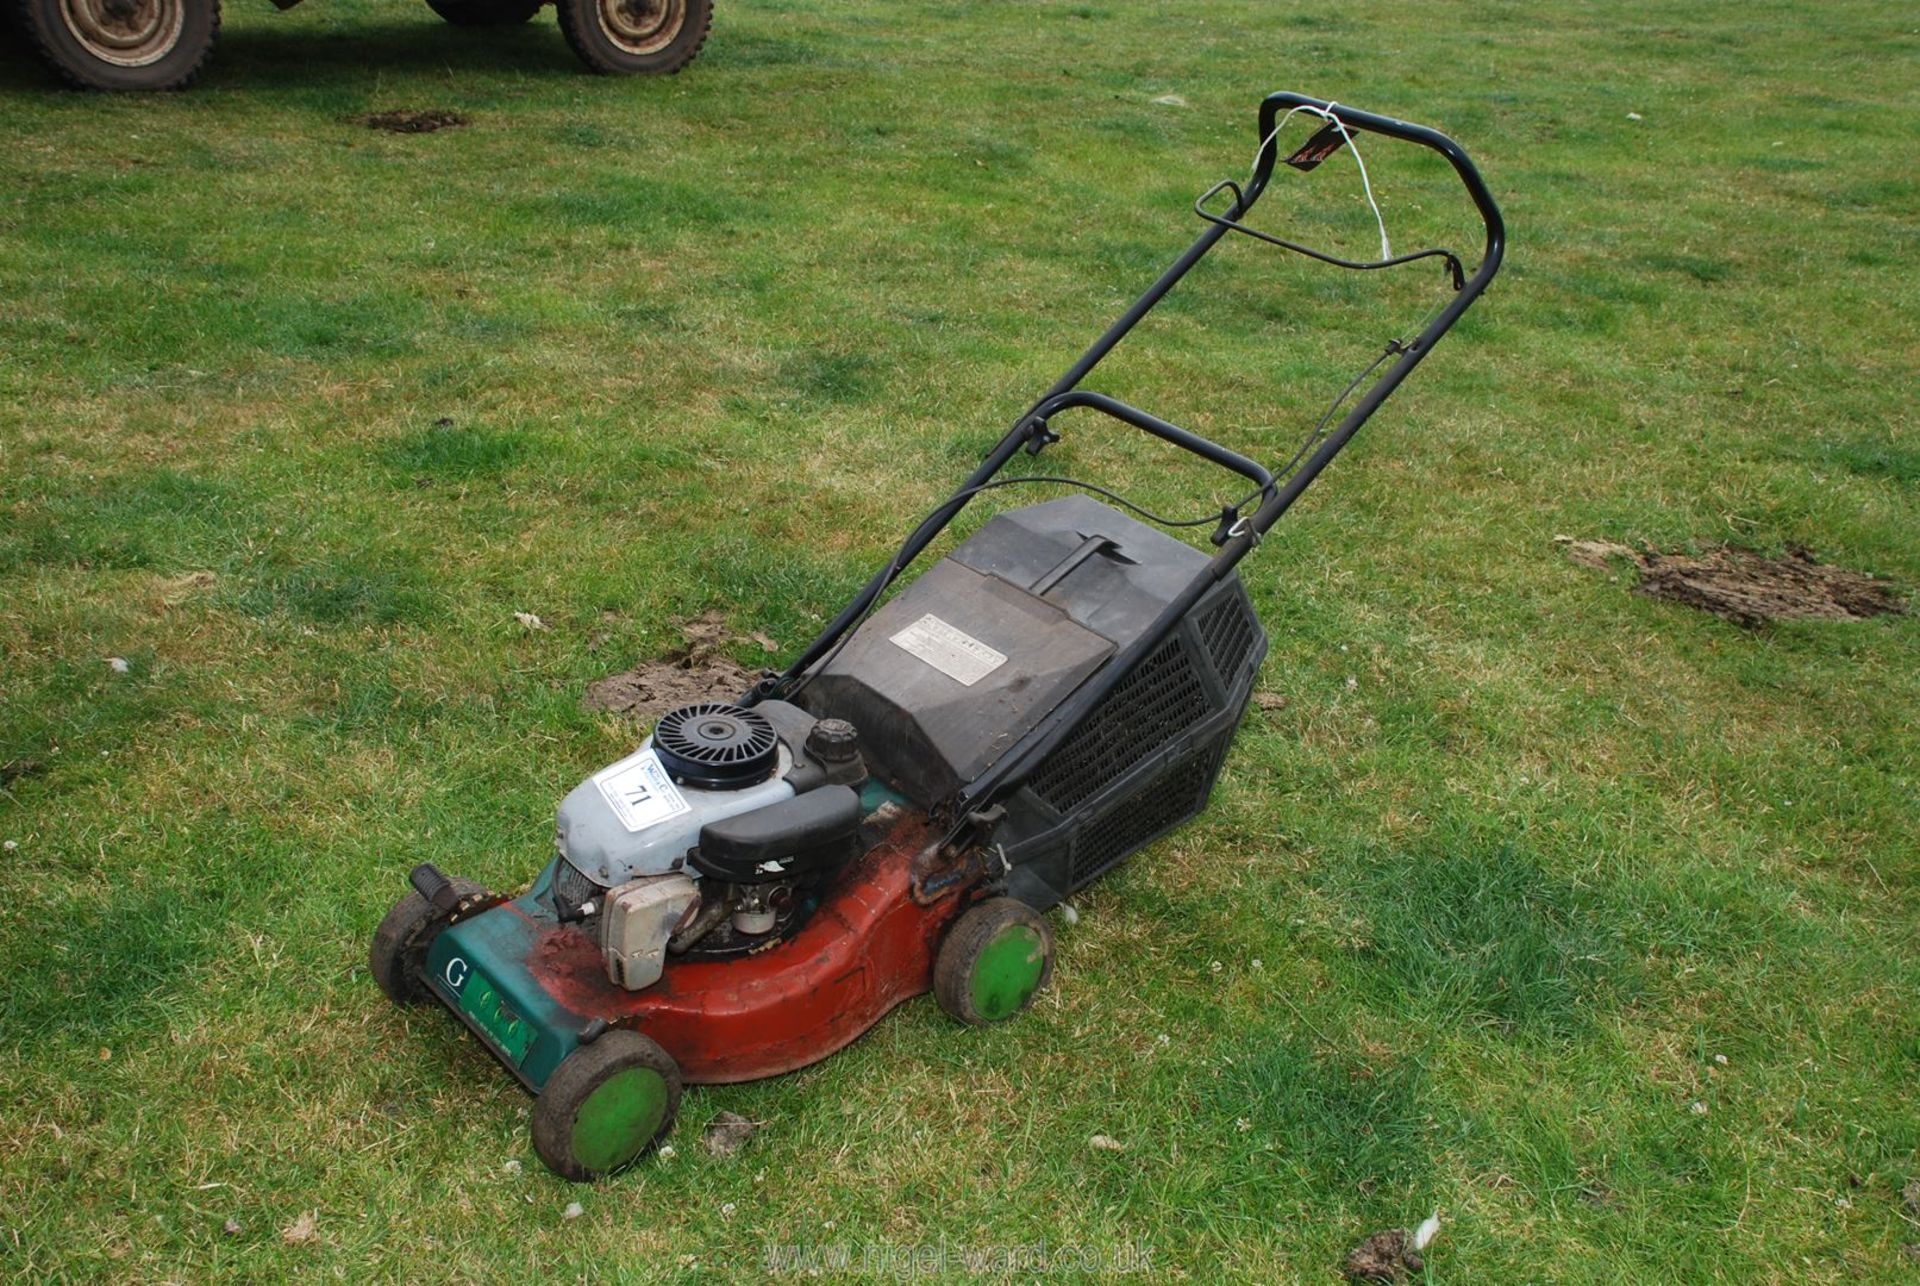 A Gardenline petrol engined rotary mower with grass collector box.